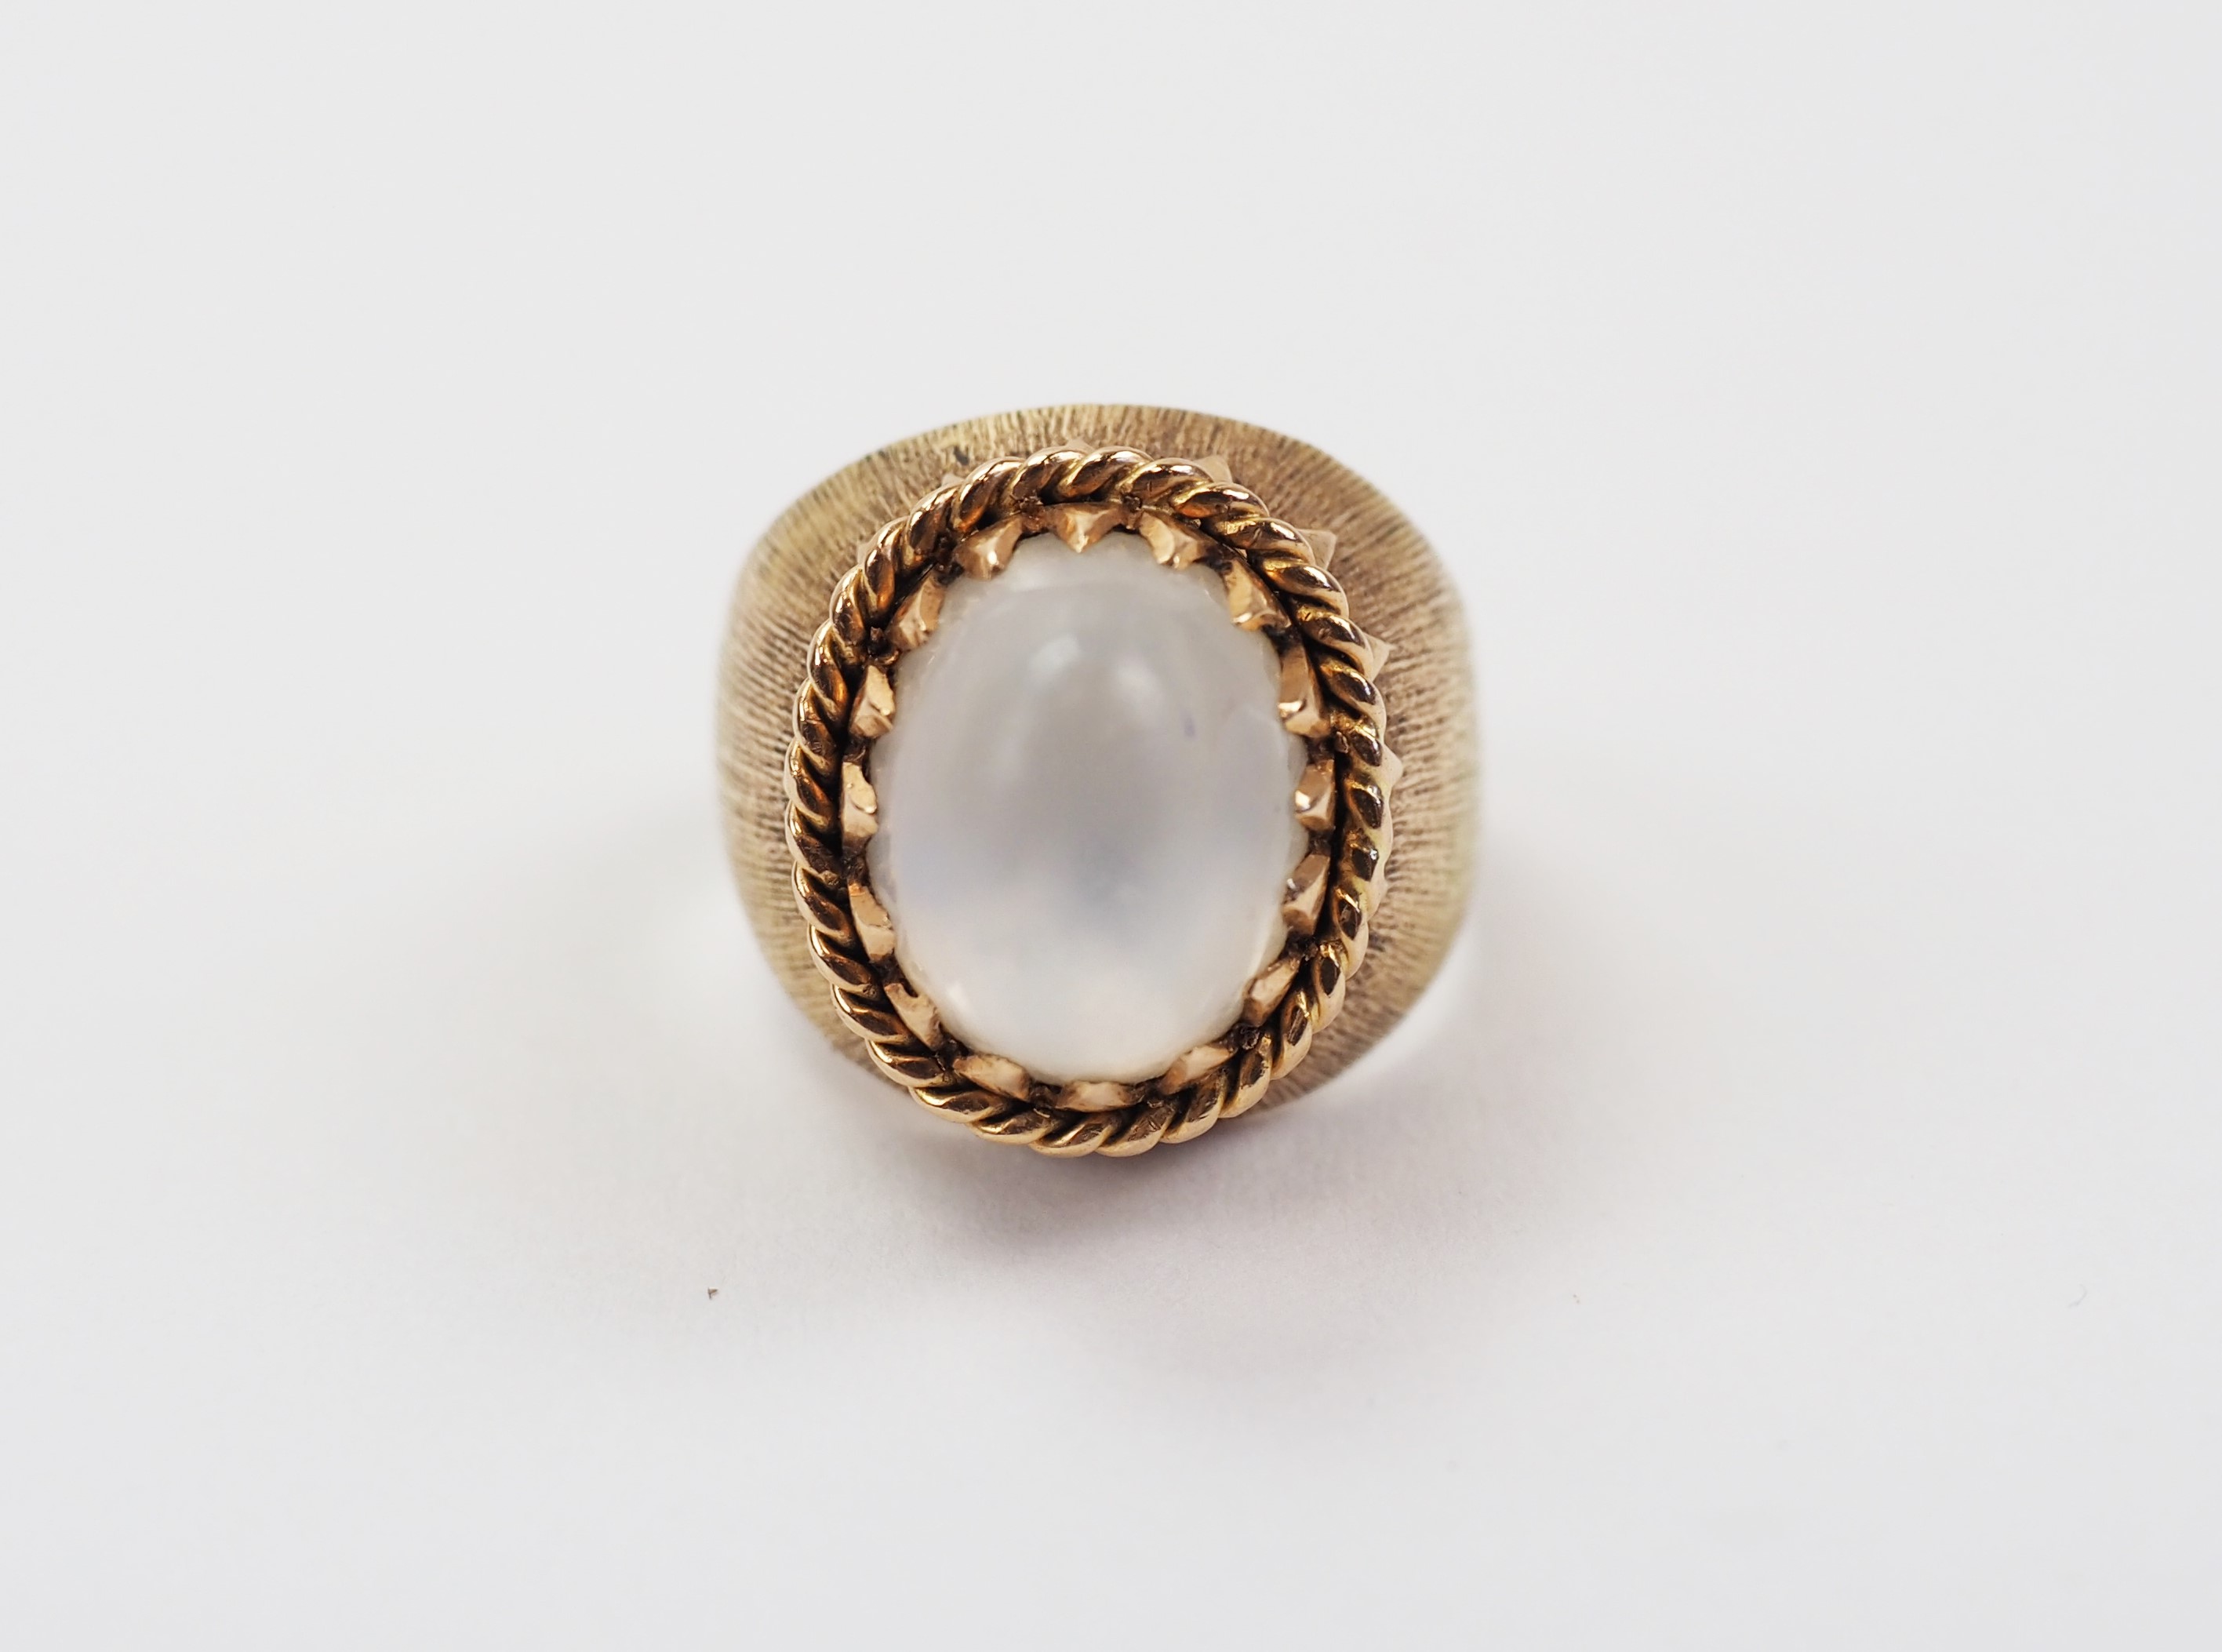 Ring GOLD. - Image 2 of 3